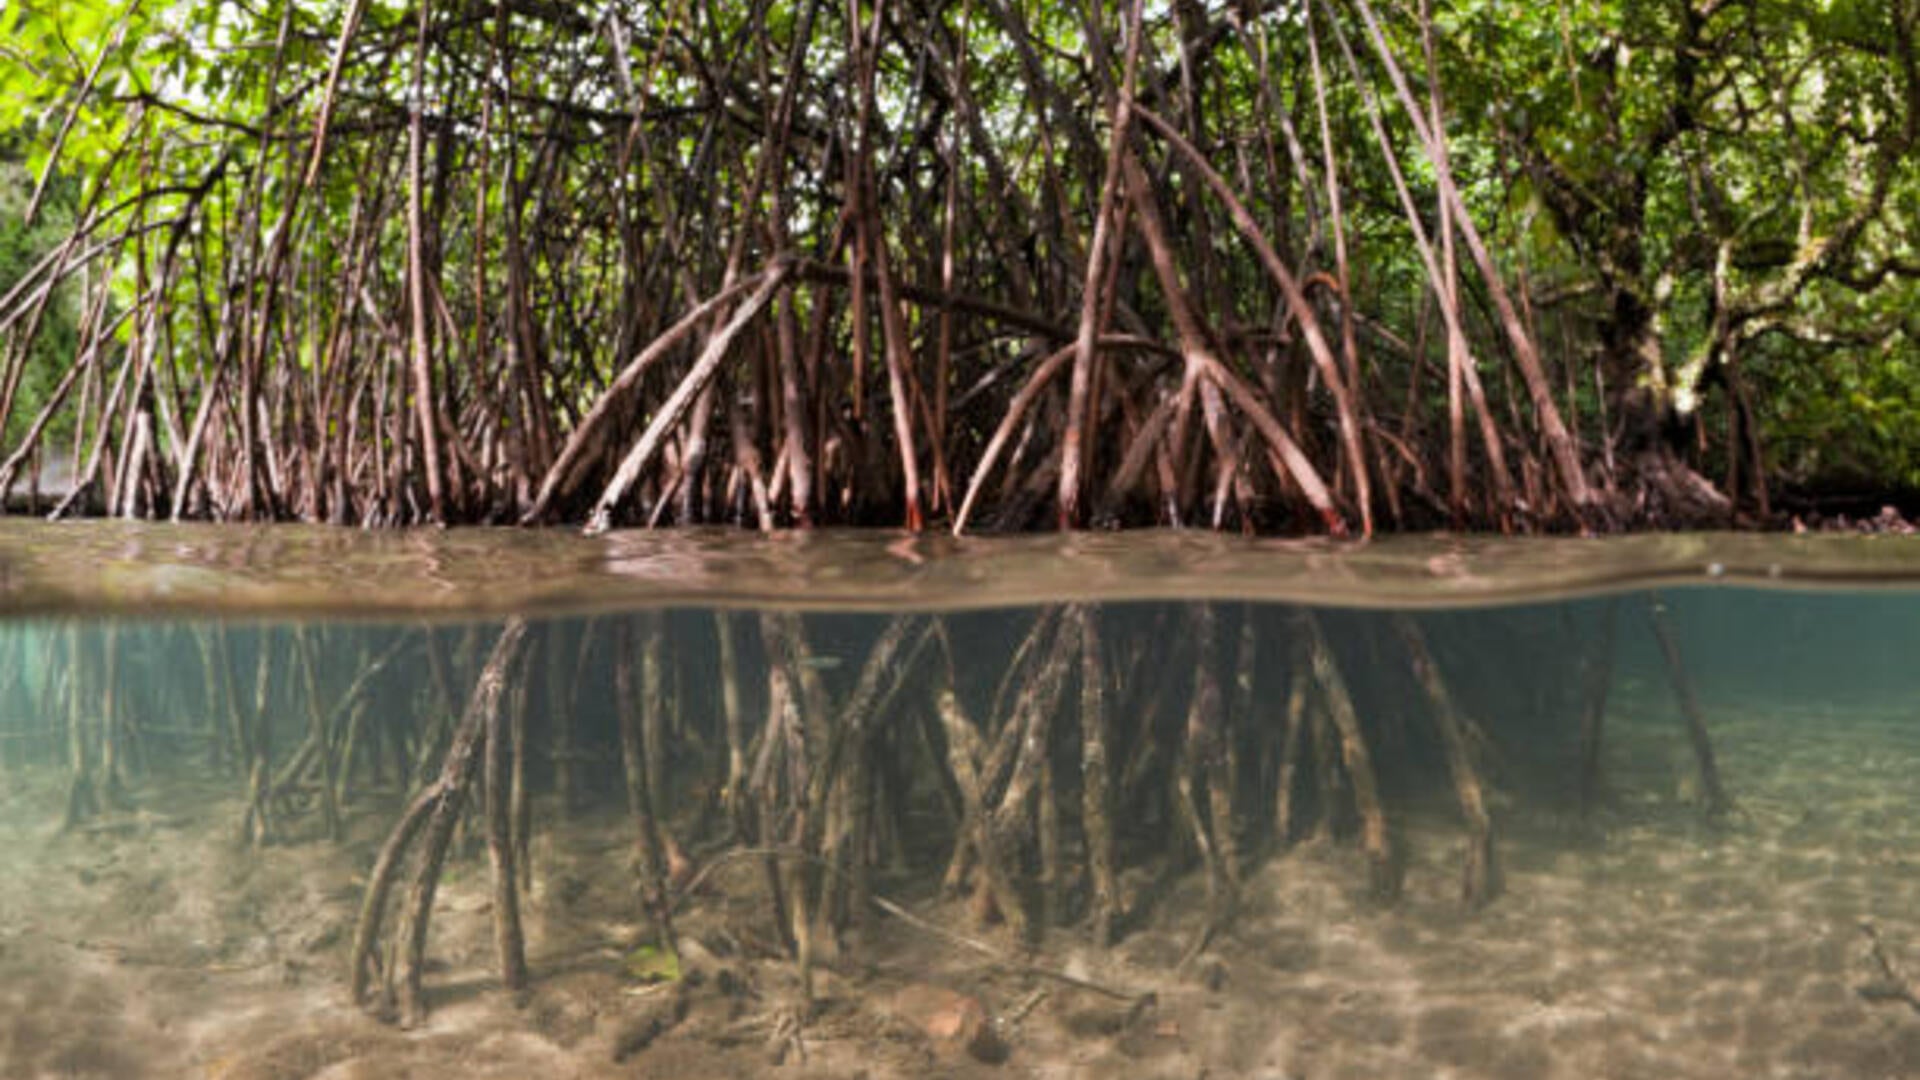 Mangrove roots in water